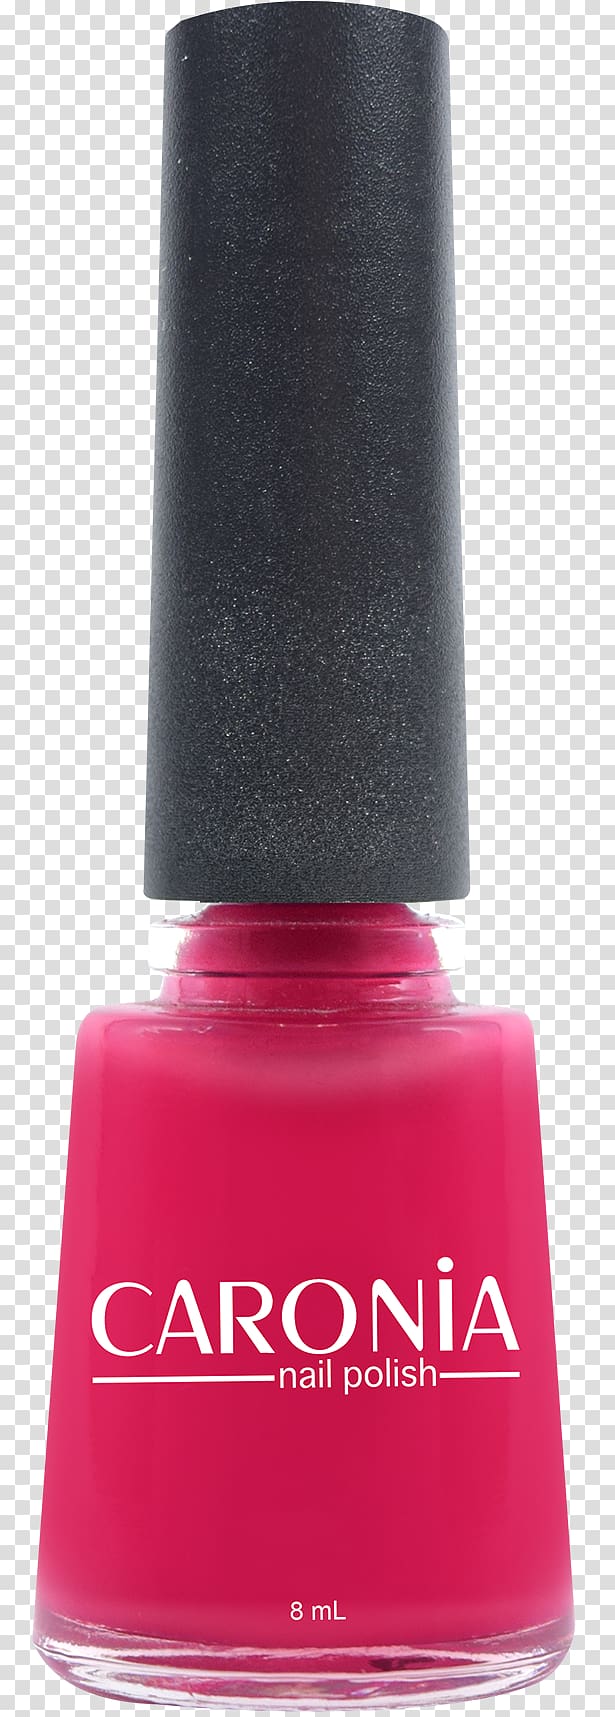 Nail Polish Cosmetics Lacquer OPI Products, nail polish transparent background PNG clipart